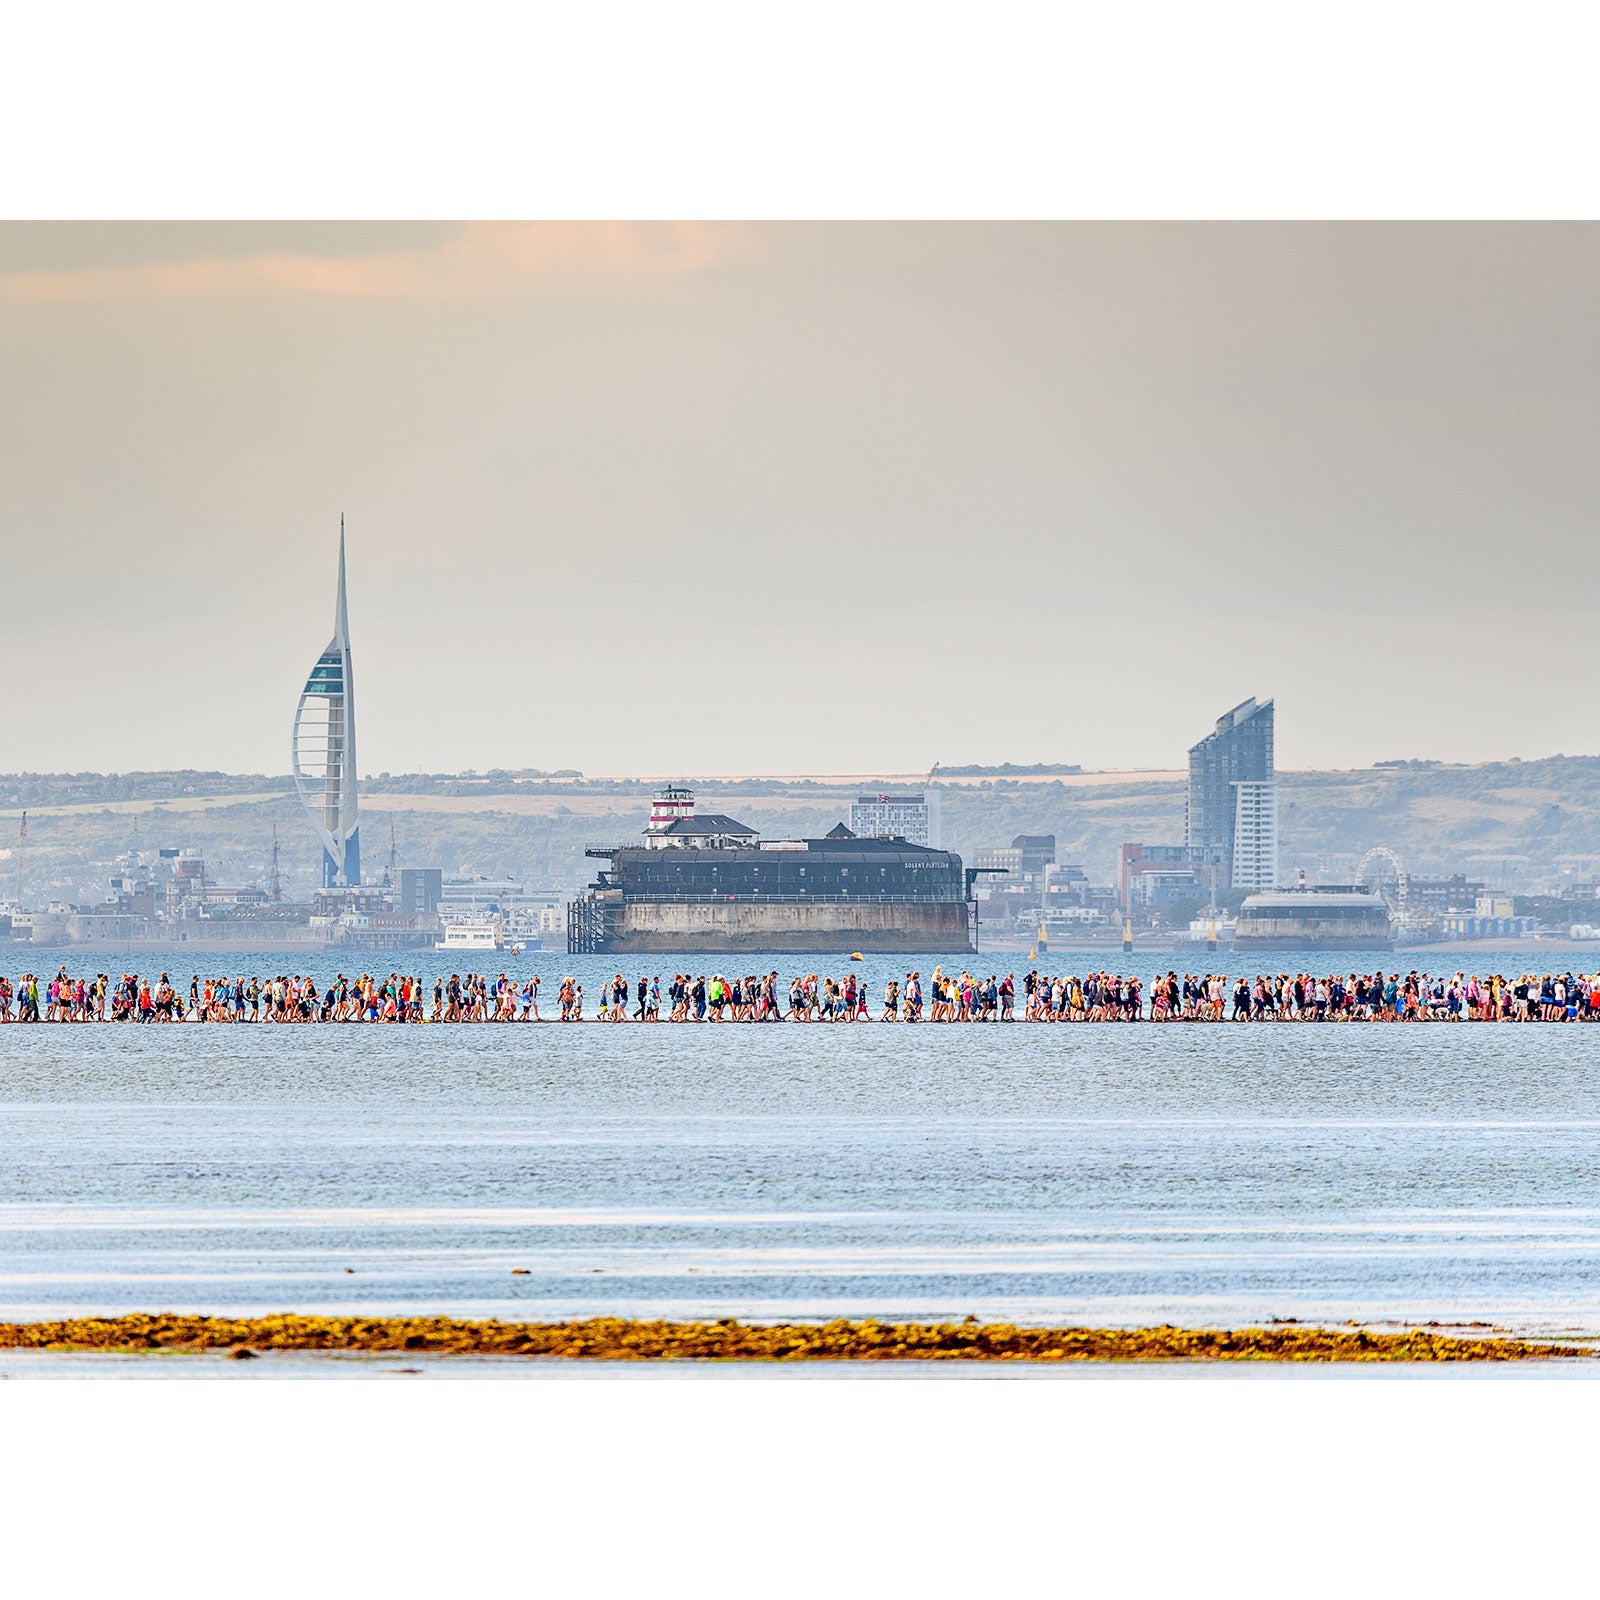 A large group of people, including Steve, walking along the shoreline on the Isle of Wight with a city skyline in the background captured by the Available Light Photography's The Fort Walk.